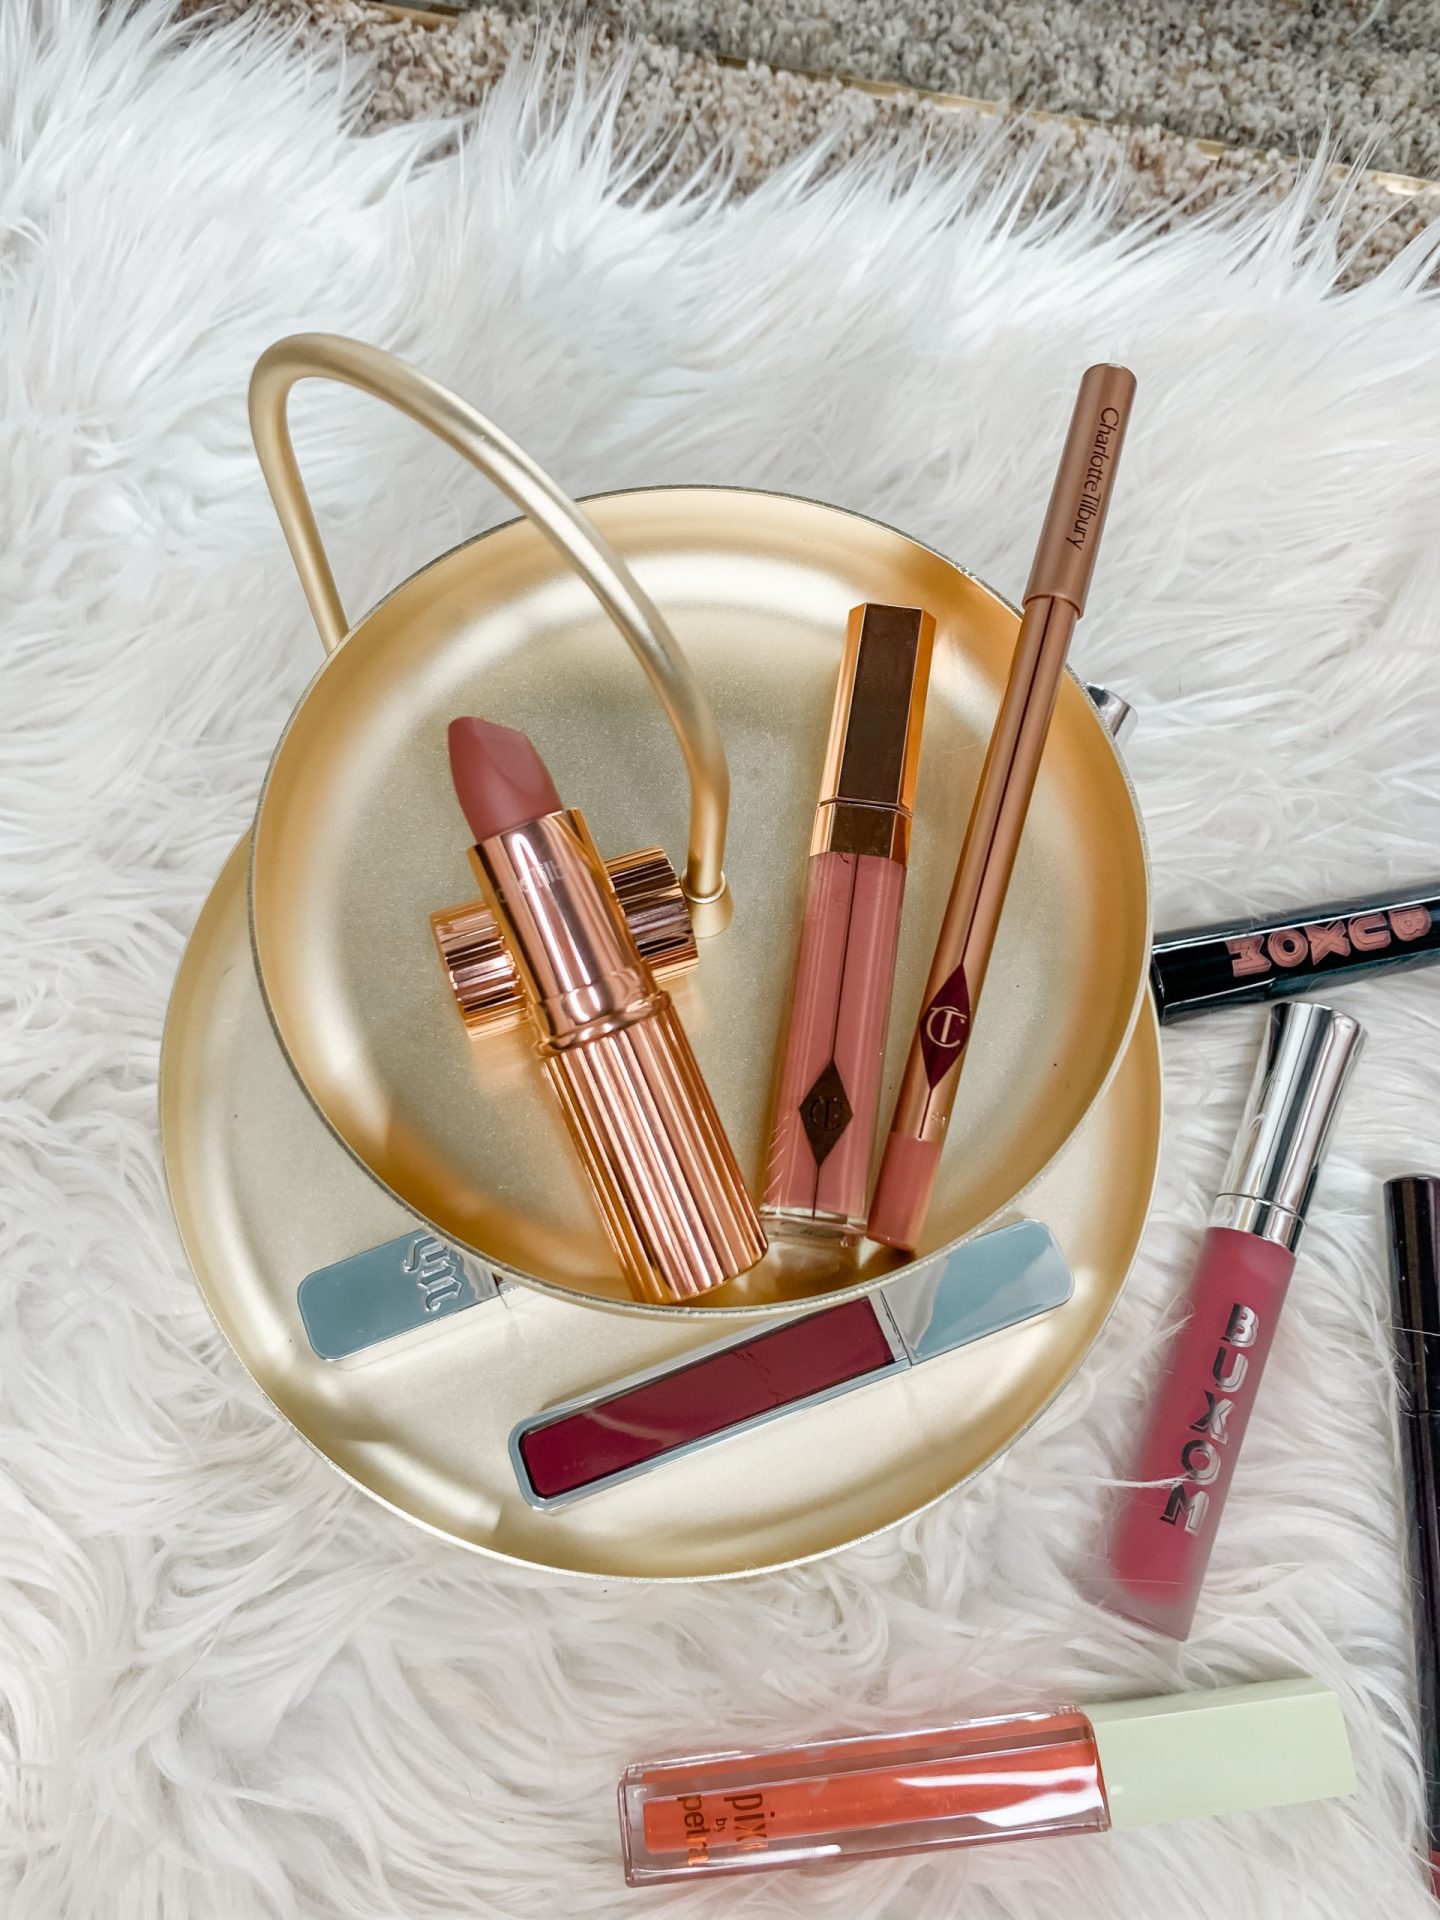 Best Lip Products for Dry Lips // Lipsticks for Dry Lips // Must Have Lip Colors // Lips Colors for Dry Lips // Natural Lip Colors // Best Lip Glosses // Best Lipsticks // Drugstore Lip Products // High-End Lip Products | Beauty With Lily #lipsticks #lipproducts